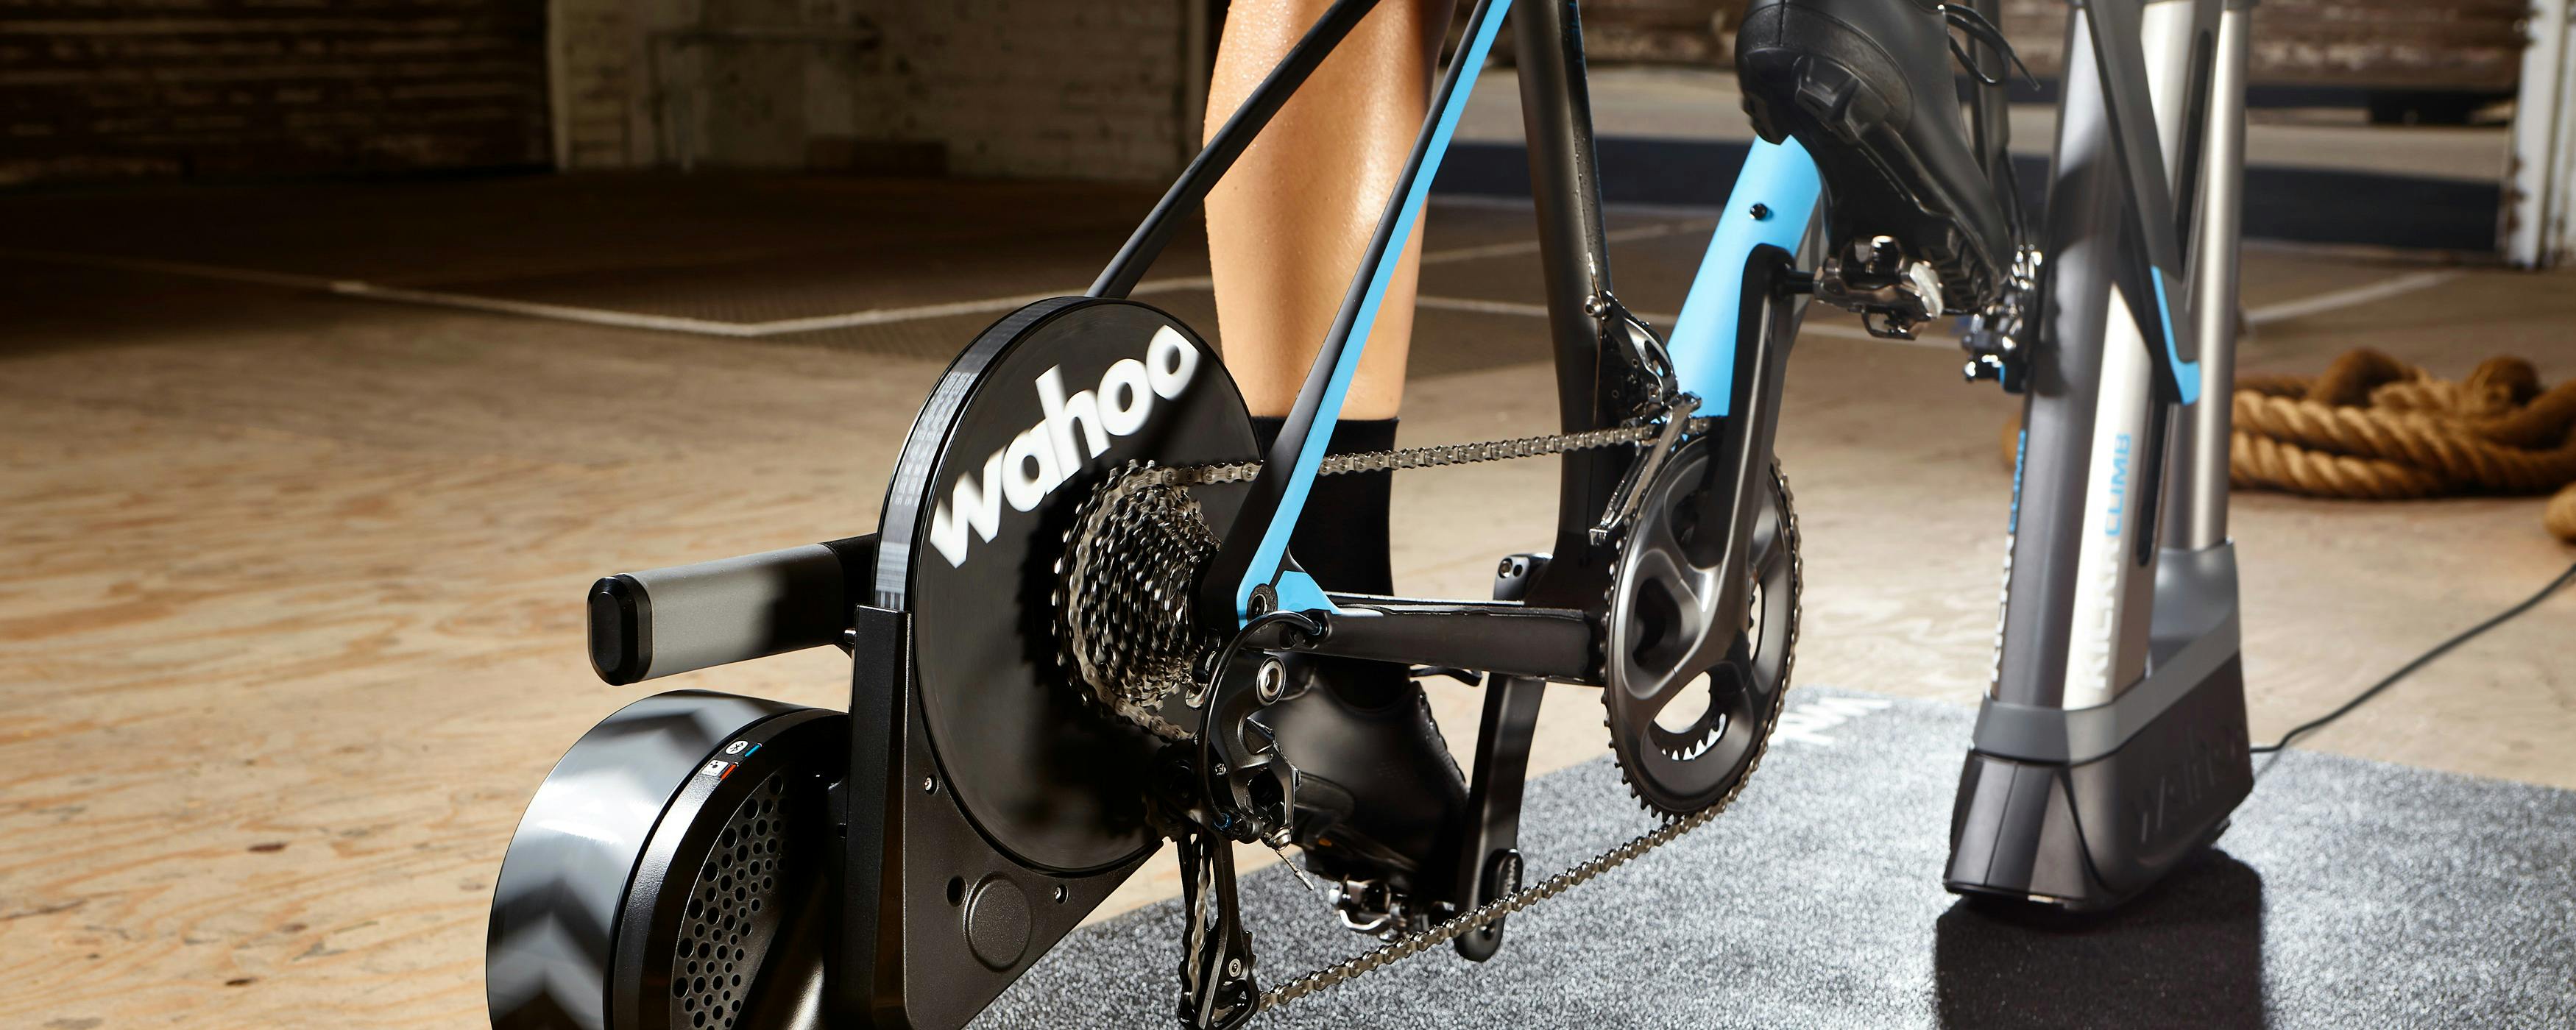  Wahoo KICKR CORE Direct Drive Bike Resistance Trainer for  Cycling/Spinning Indoors : Sports & Outdoors